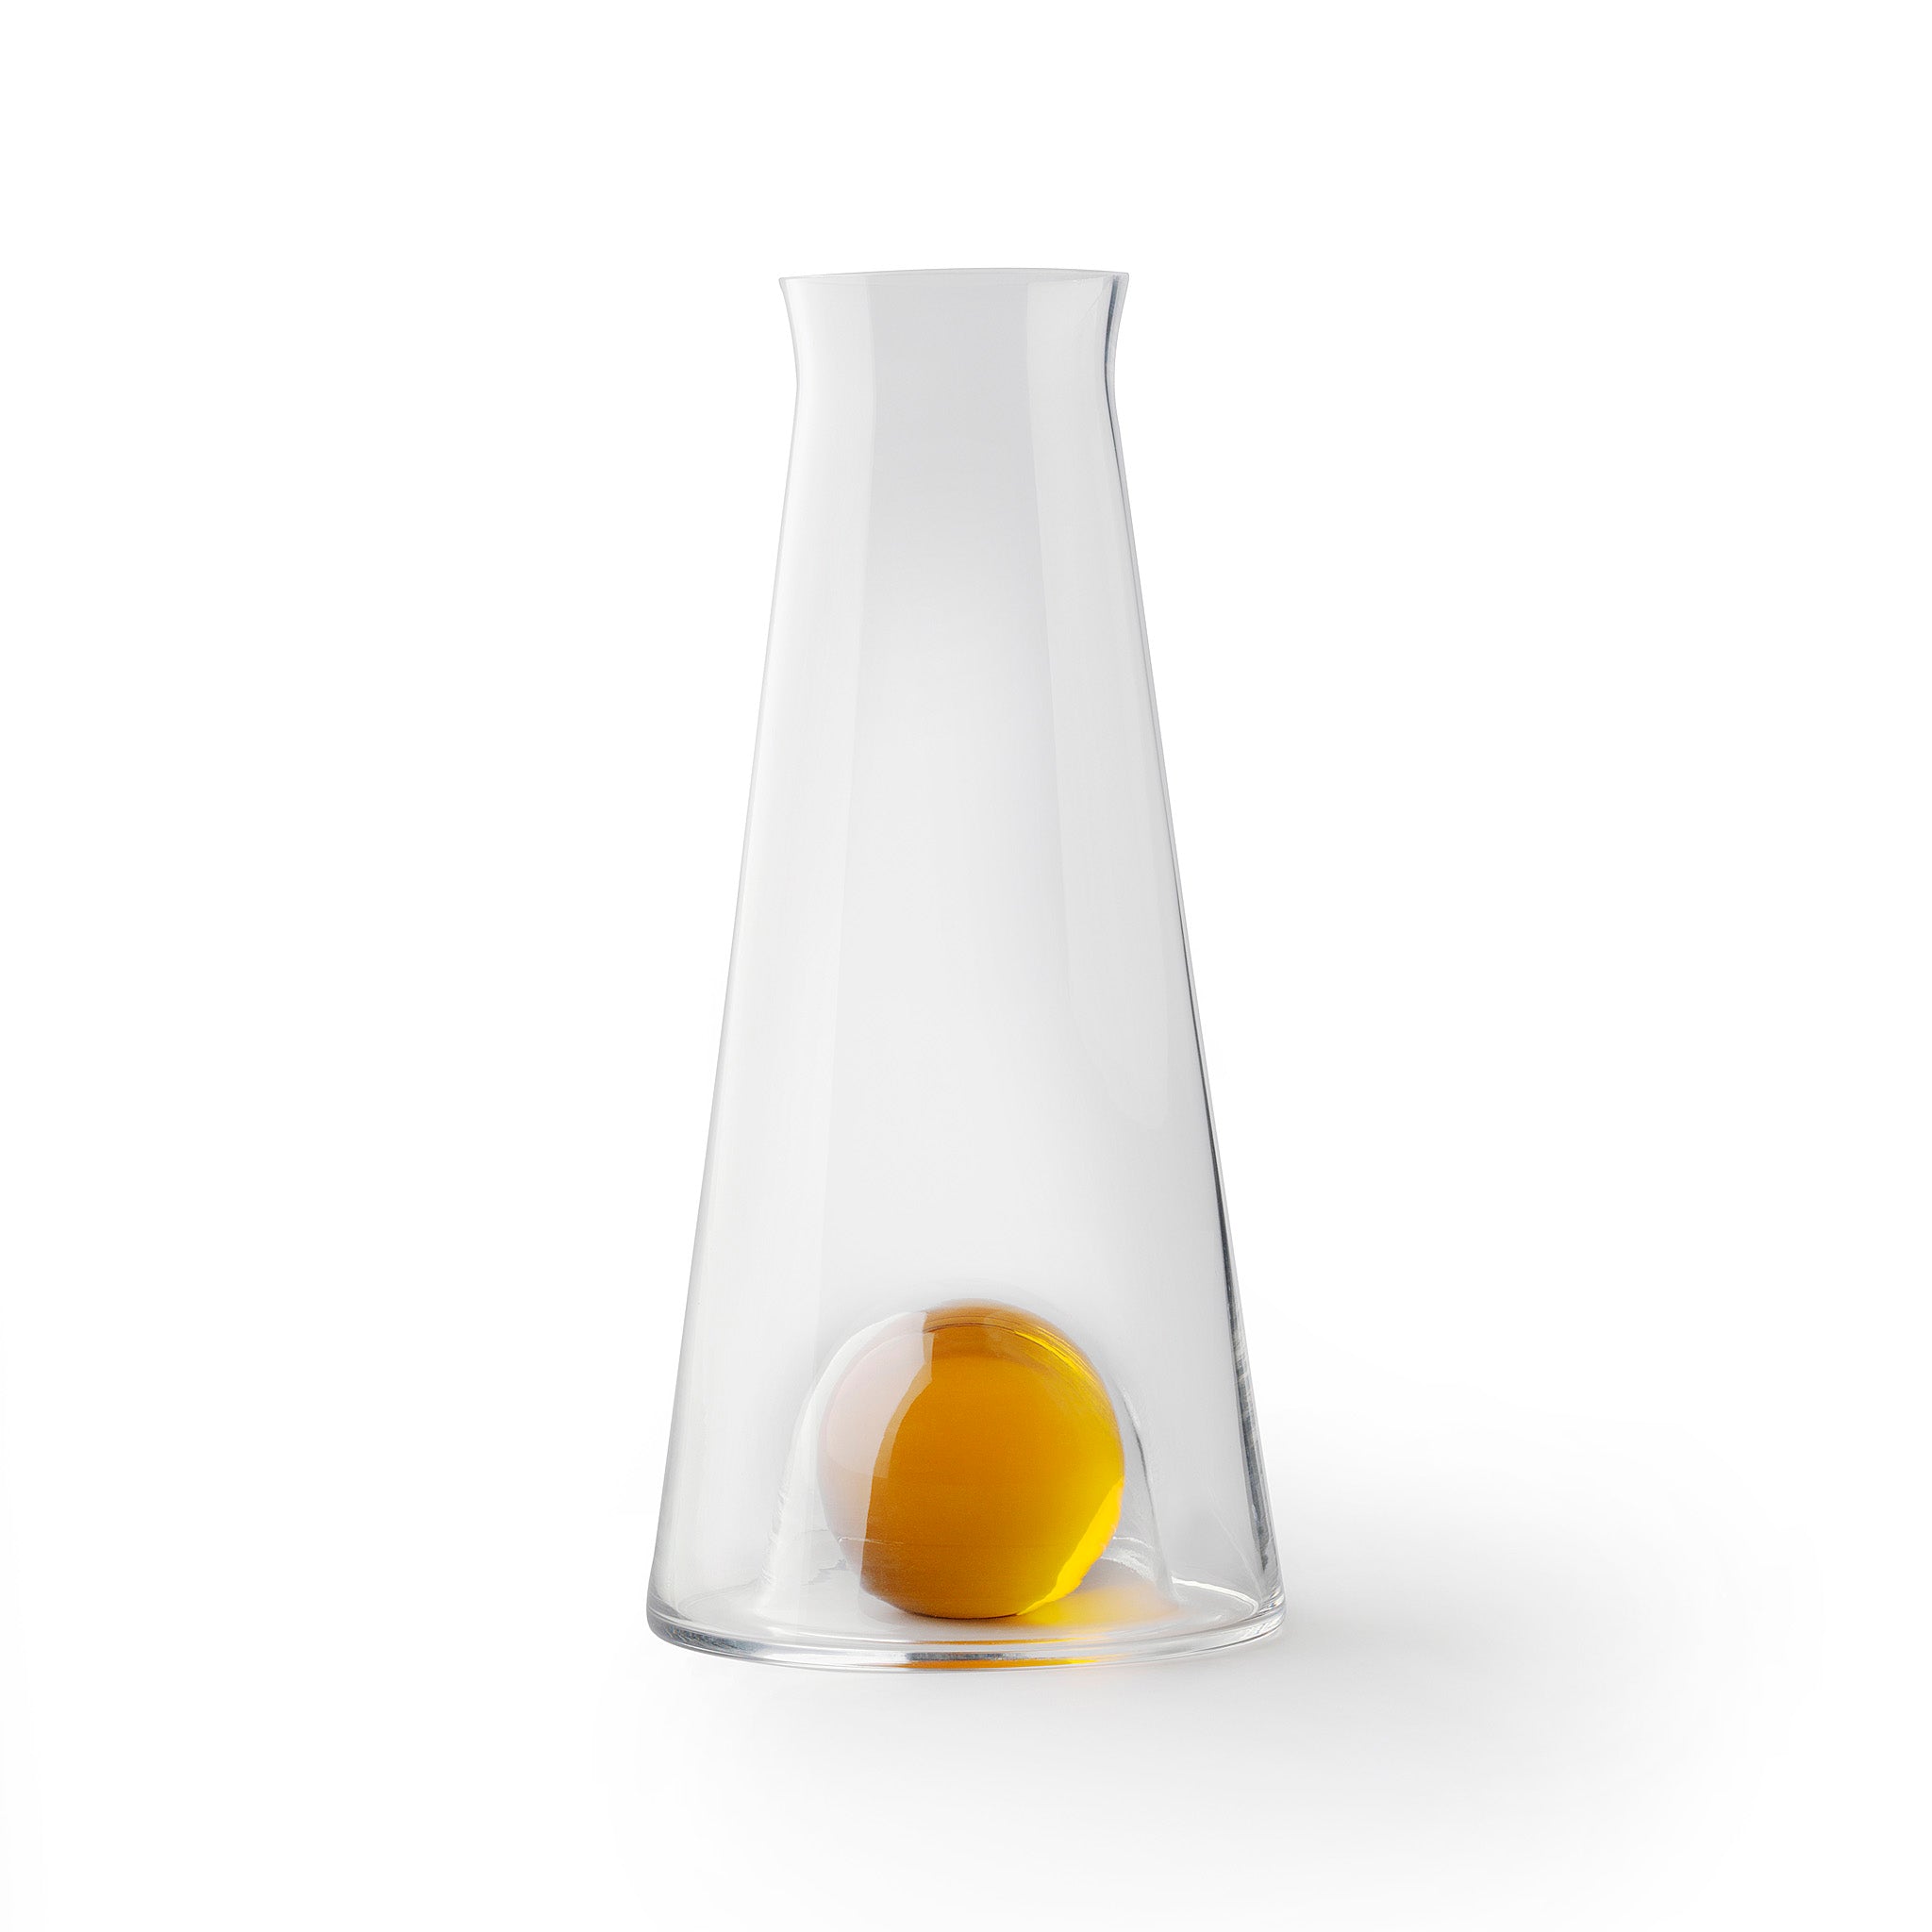 Fia Carafe by Nina Jobs for Design House Stockholm. “Serve Beaujolais nouveau in style.”